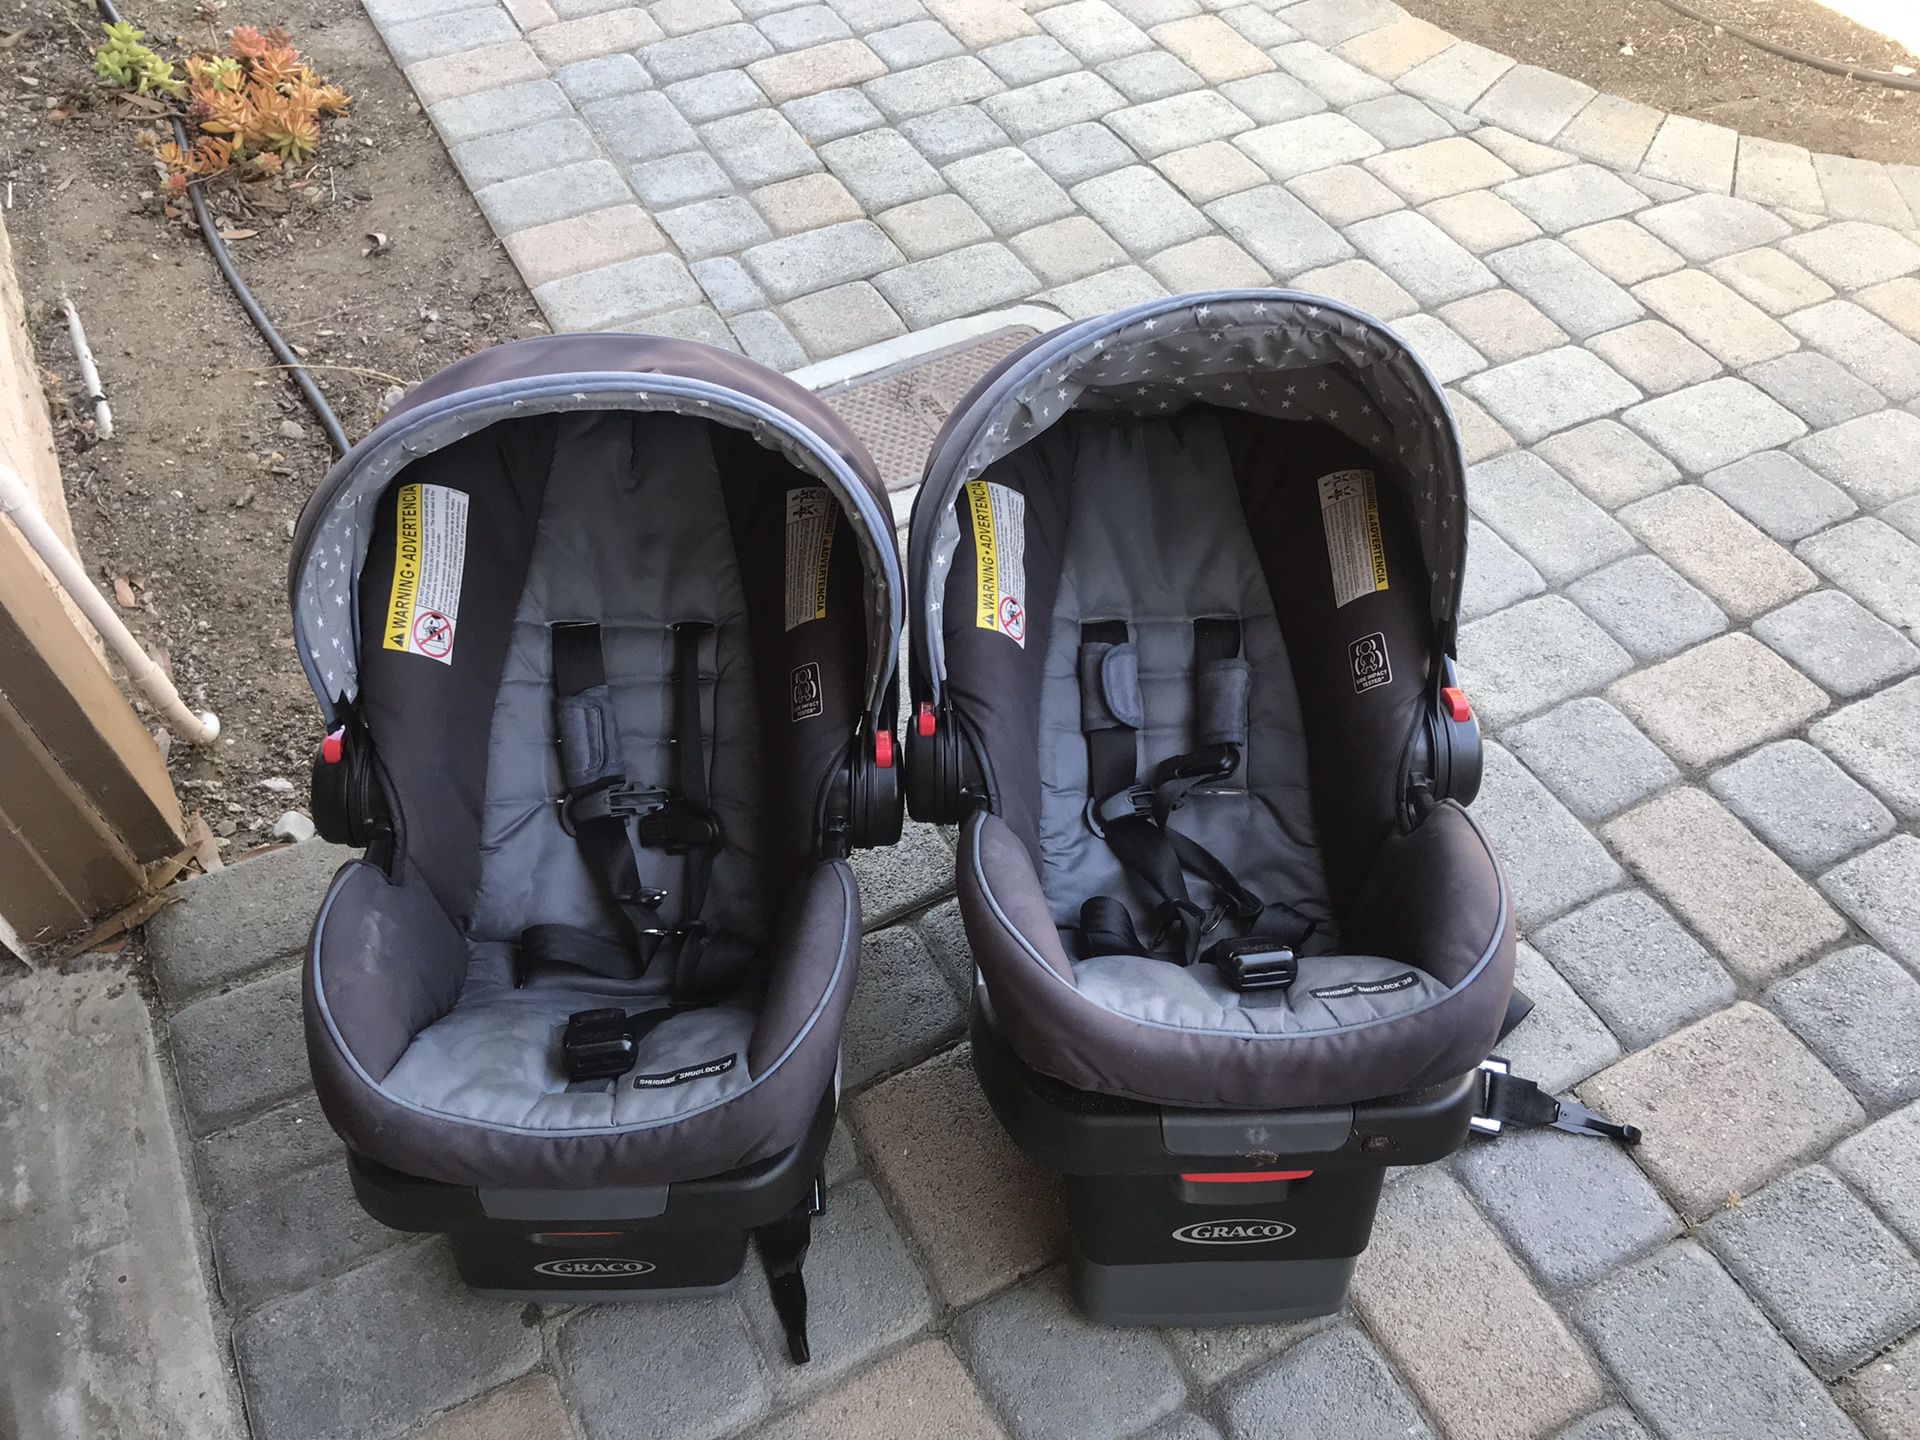 Graco infant car seats in great condition - 2 available